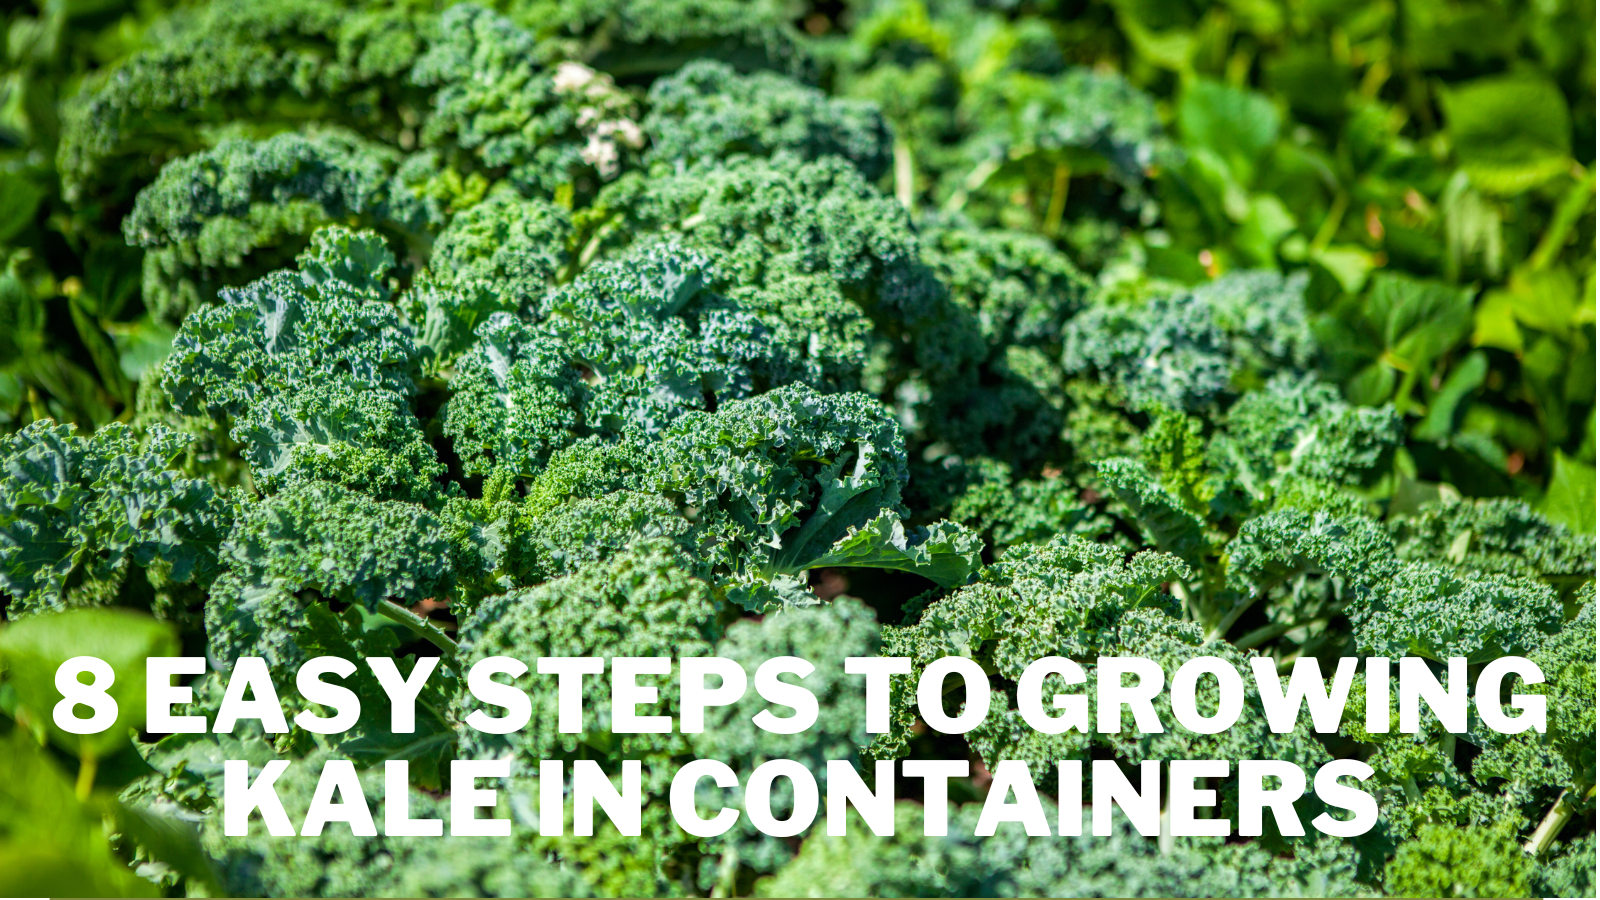 8 Easy Steps To Growing Kale In Containers